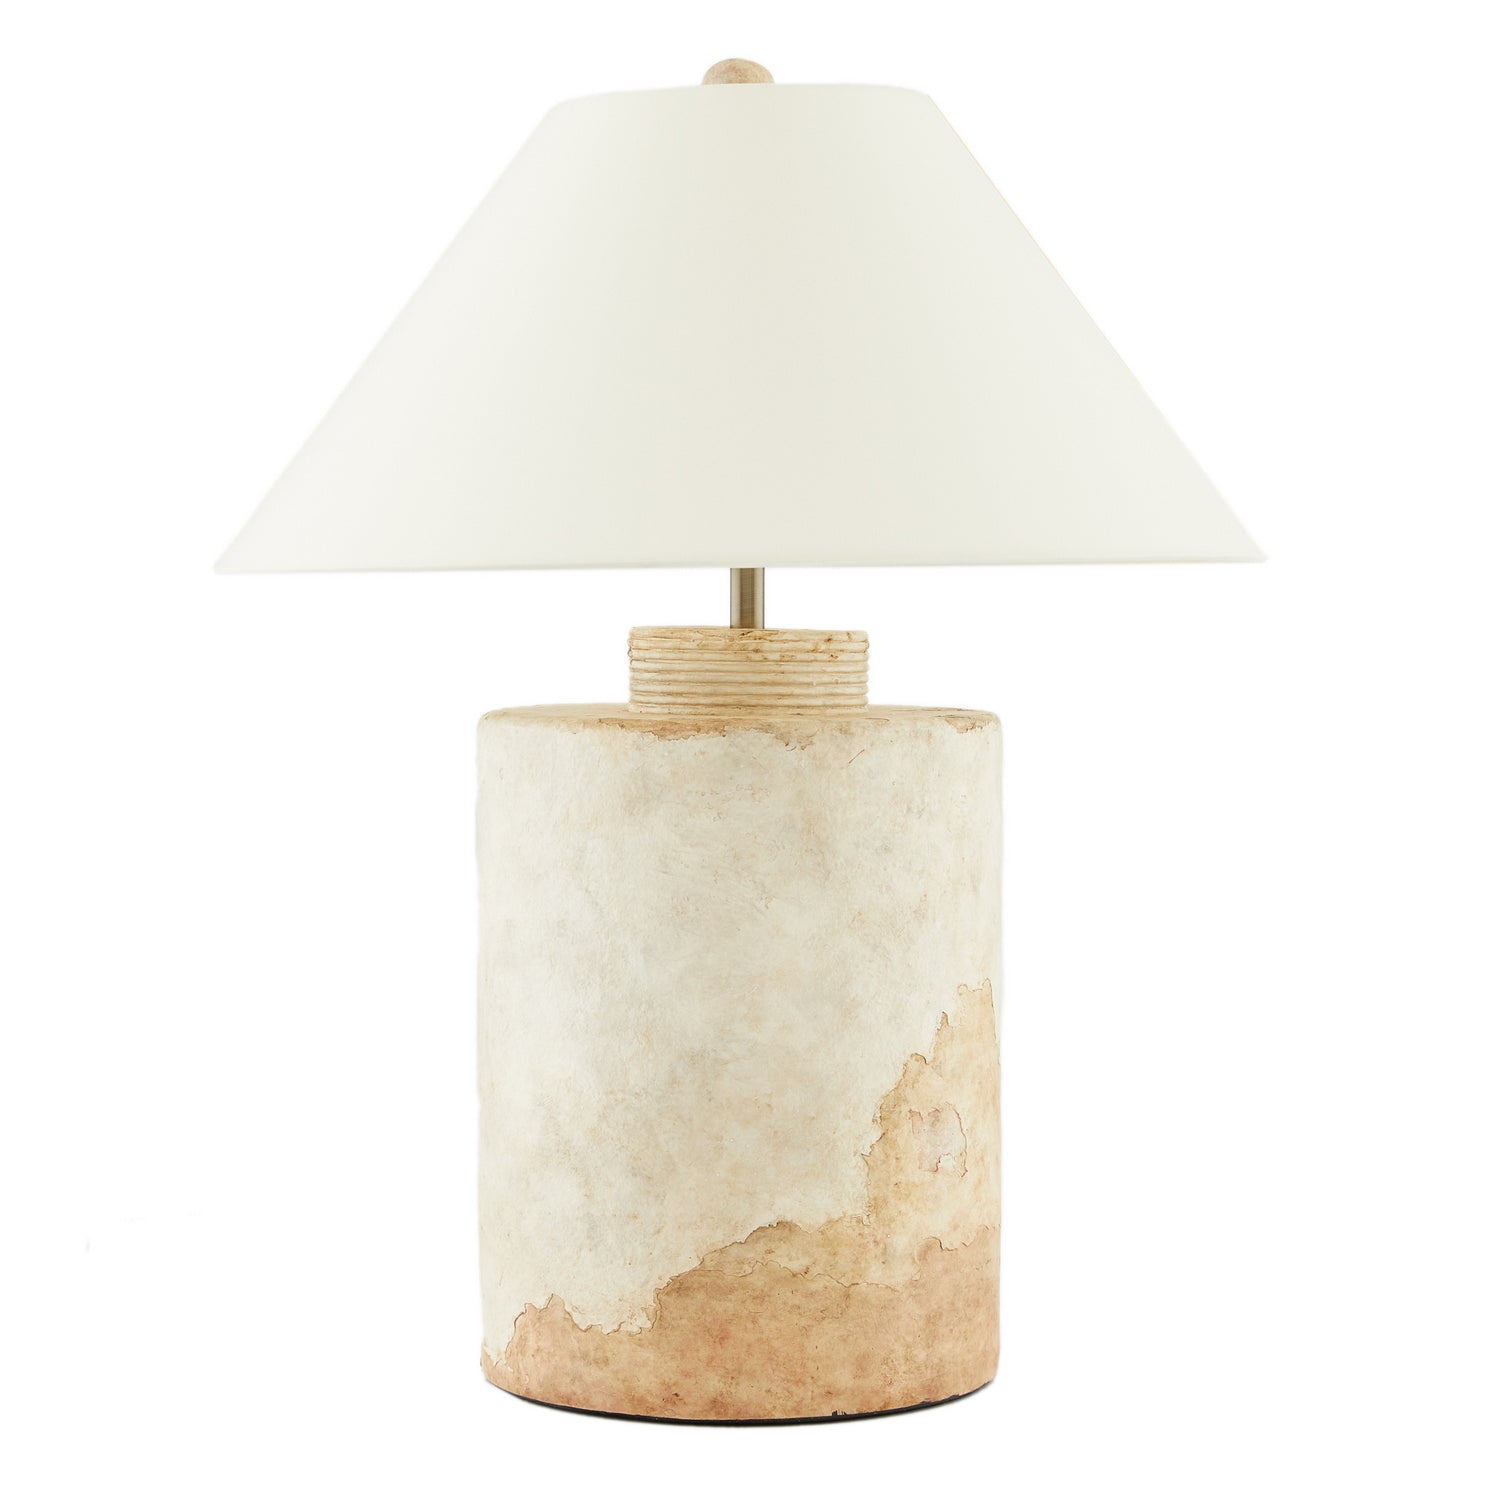 One Light Table Lamp from the Samala collection in Tuscan Wash finish